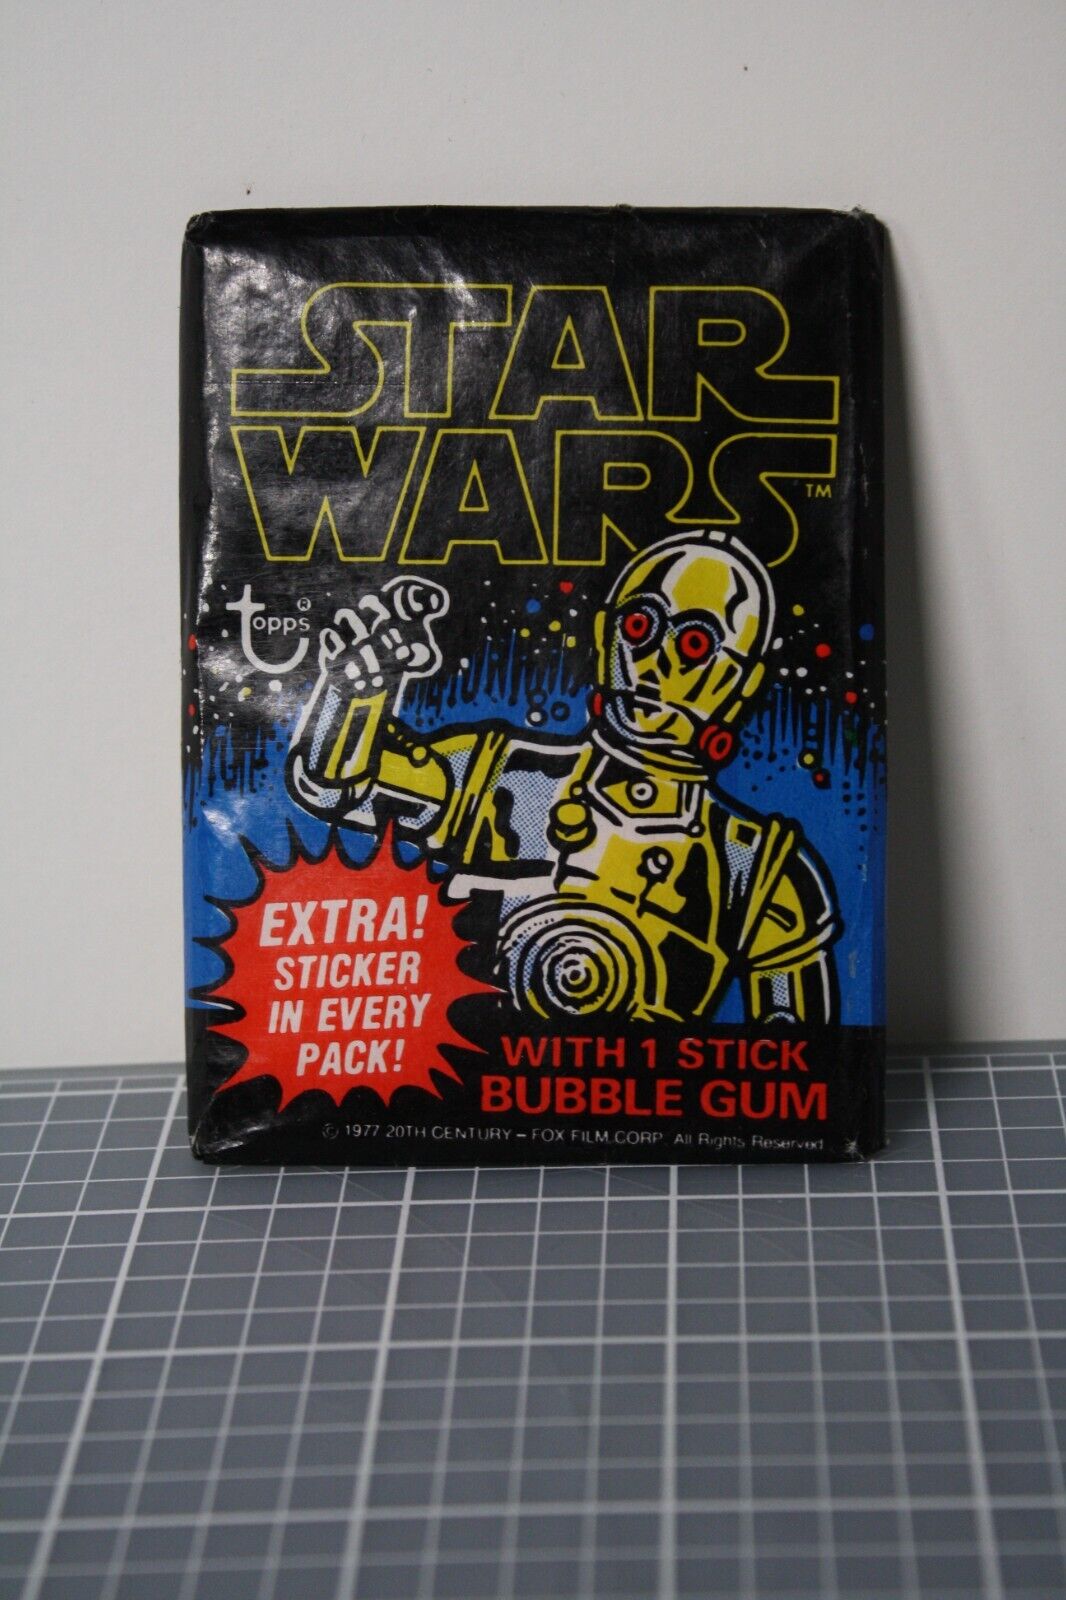 Star Wars Vintage 1977 Series 1 Sealed Wax Pack topps cards & sticker